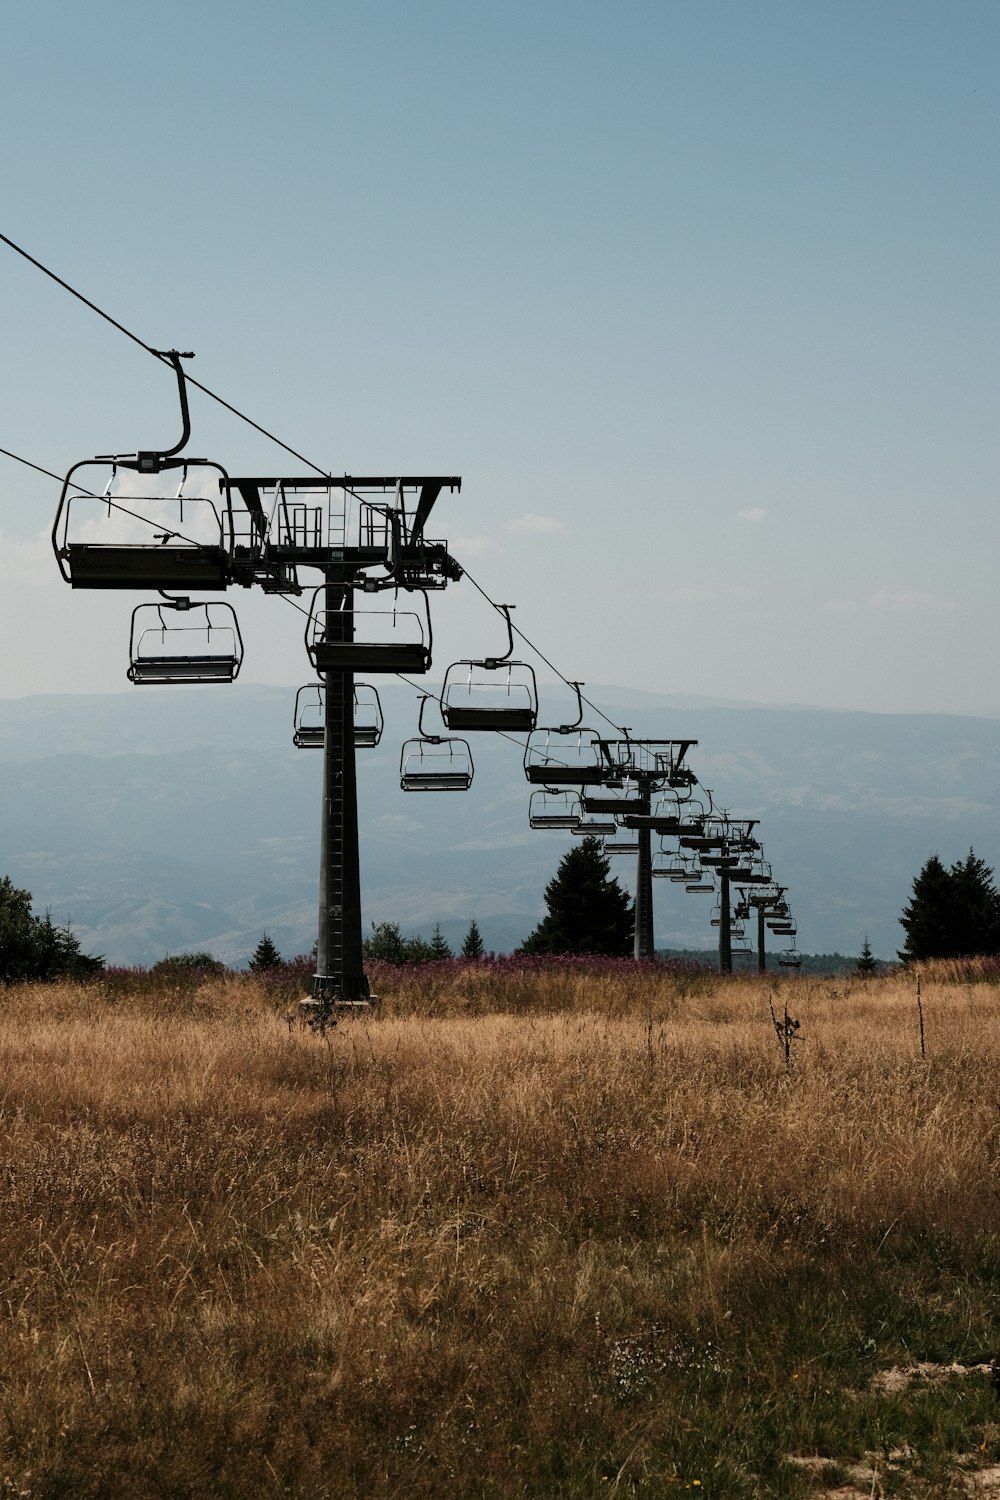 a ski lift going up the side of a hill